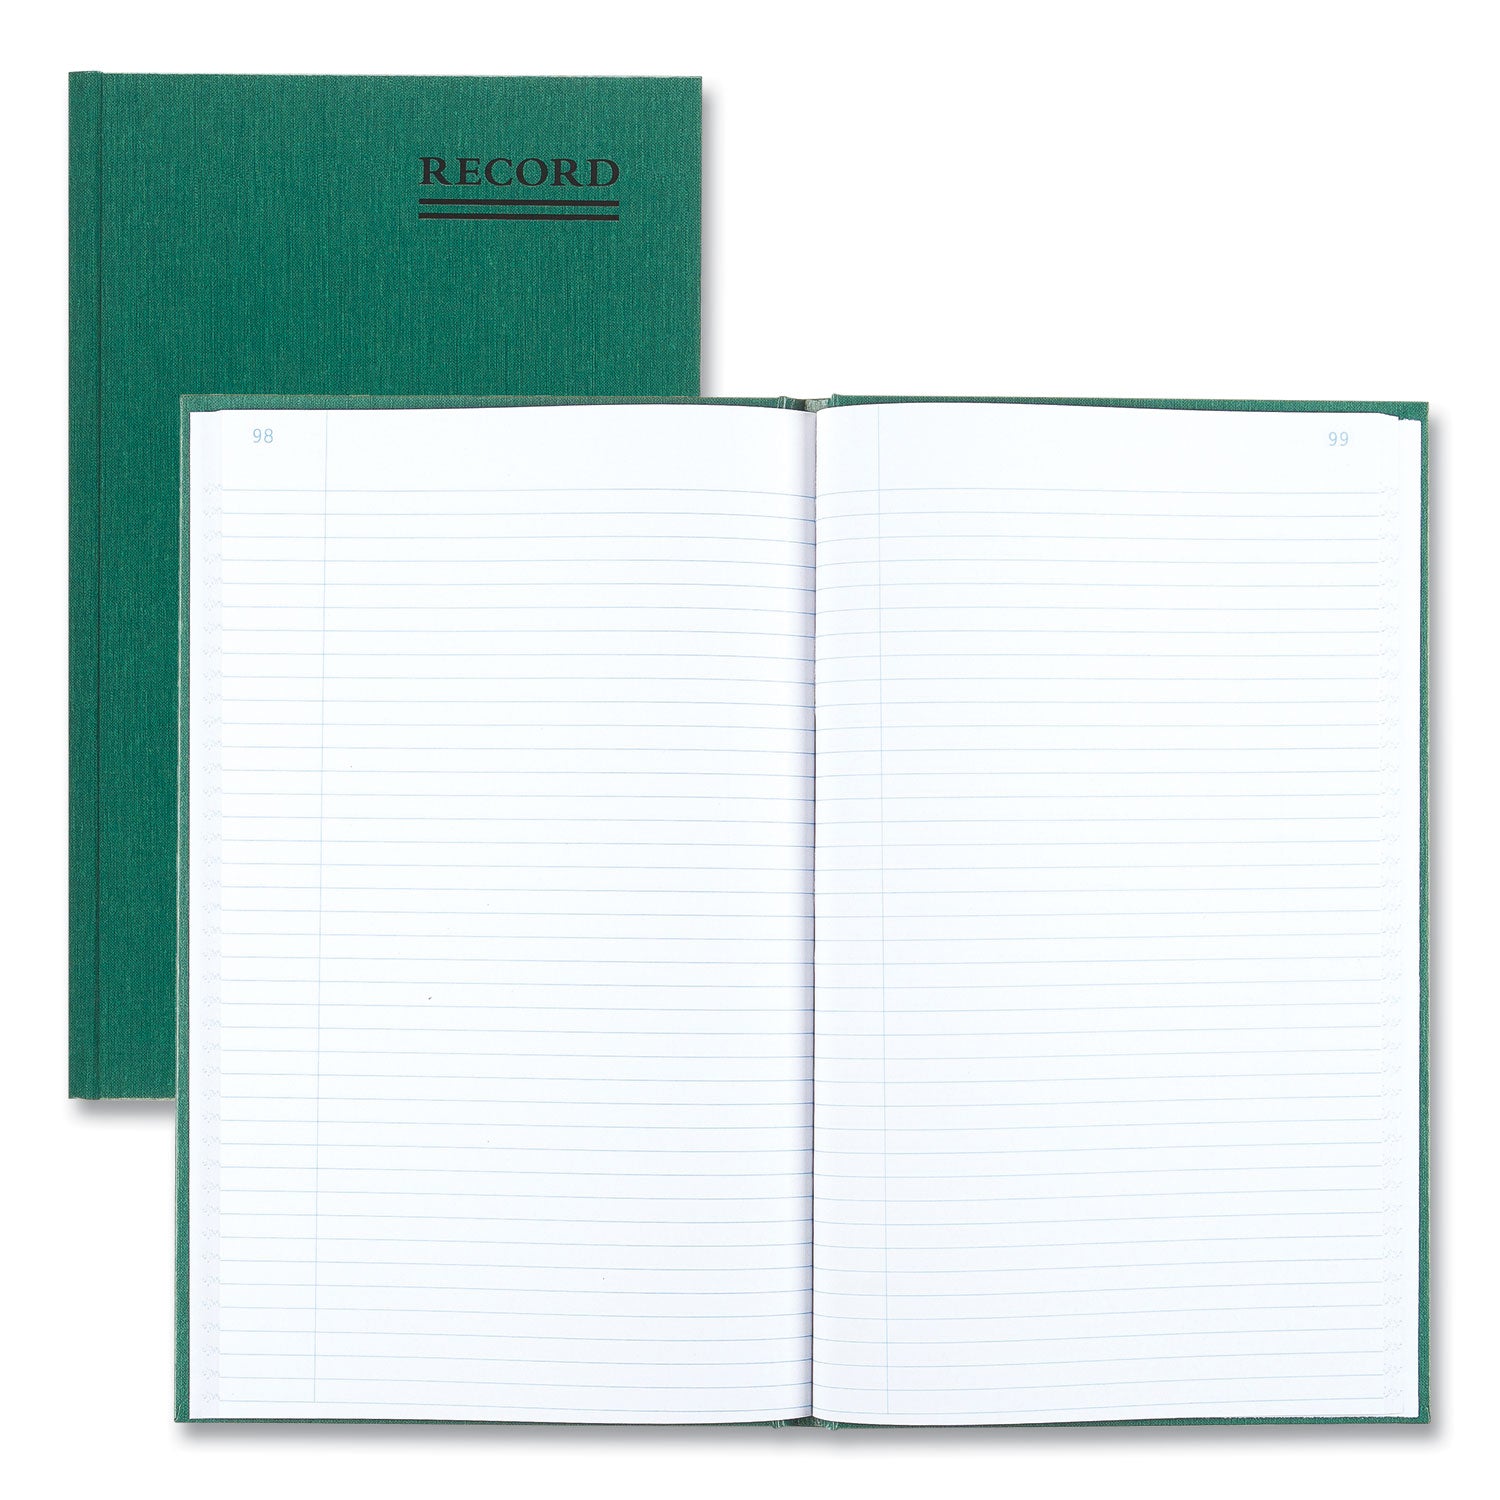 Emerald Series Account Book, Green Cover, 12.25 x 7.25 Sheets, 150 Sheets/Book - 